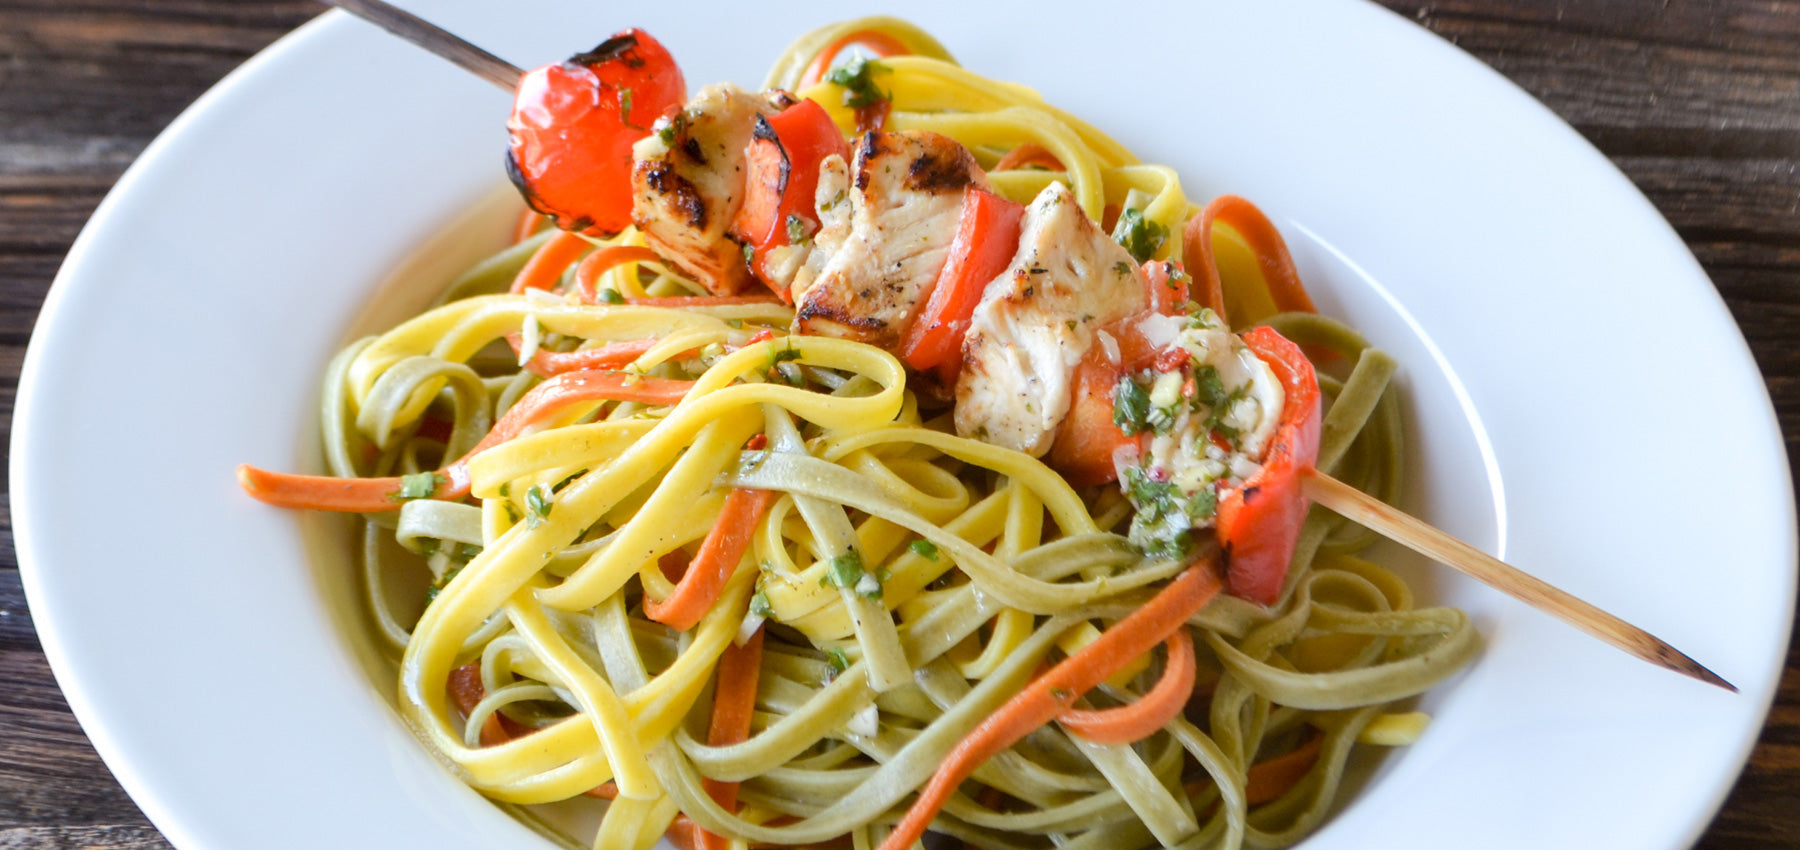 Cilantro Lime Chicken Skewers over Bell Pepper Trio Linguine